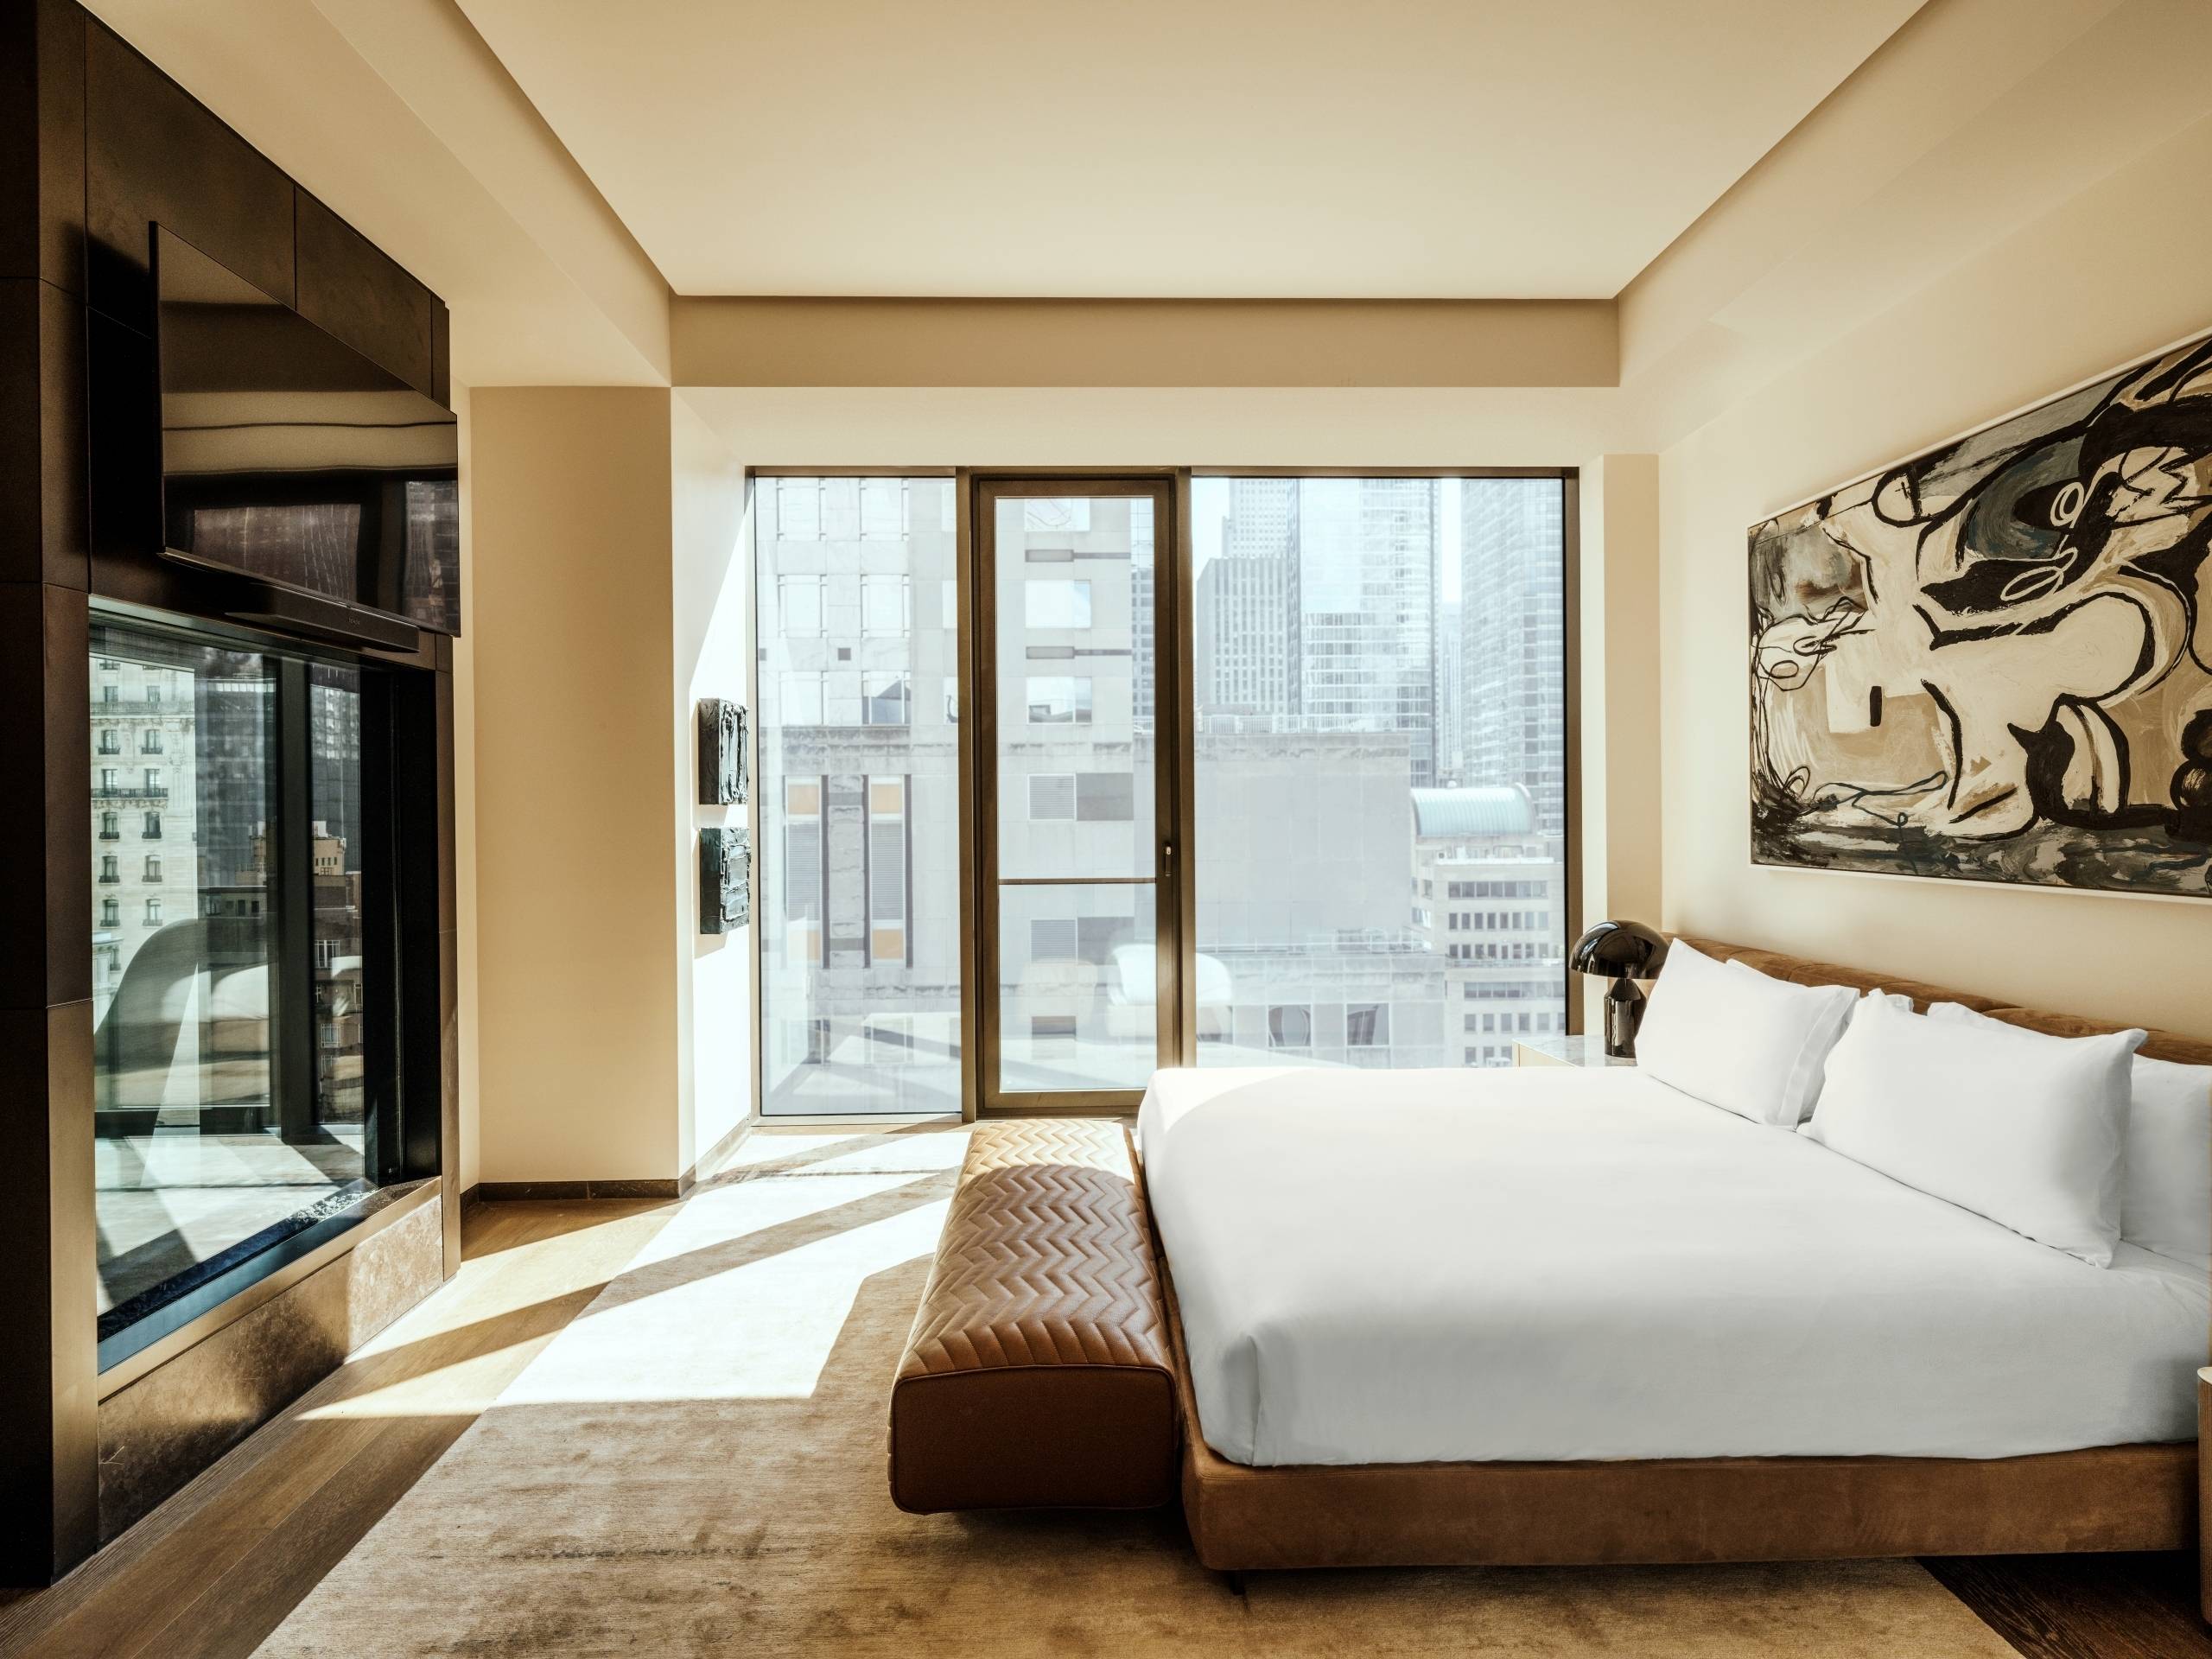 Situated on the 18th floor of Aman New York, this one bedroom branded and fully serviced residence offers expansive views through floor to ceiling windows overlooking 56th Street.